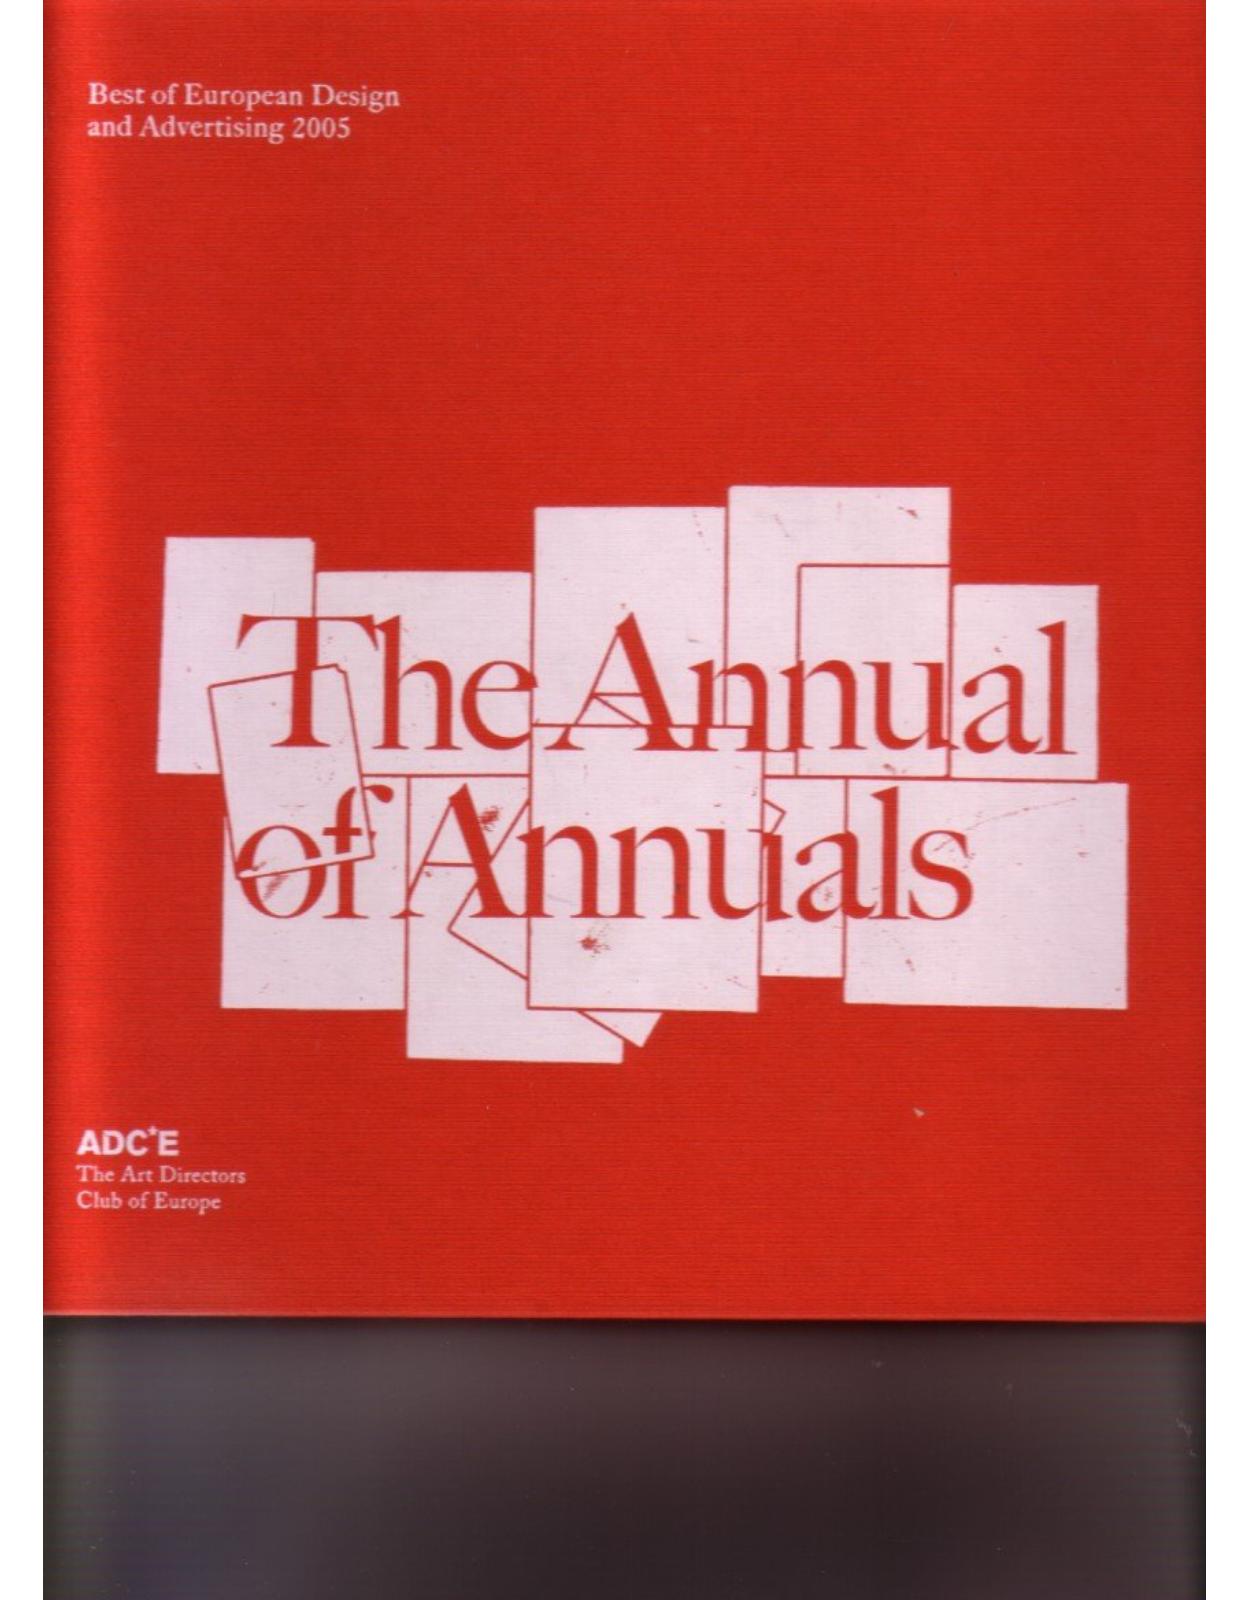 The Annual of Annuals